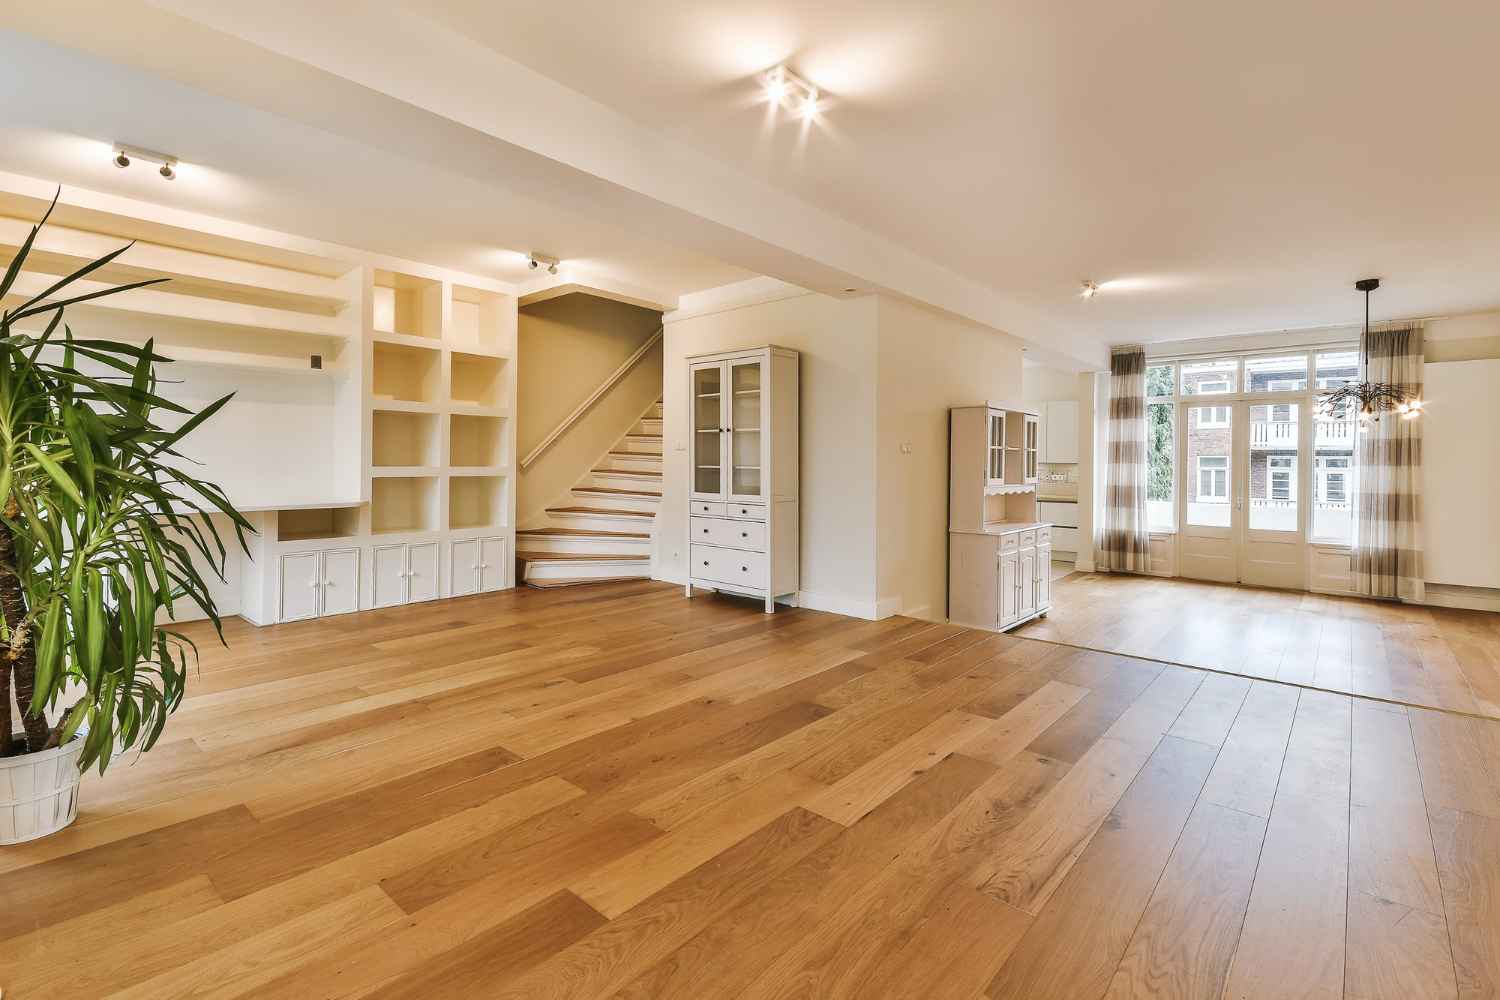 aesthetic home with wooden floors